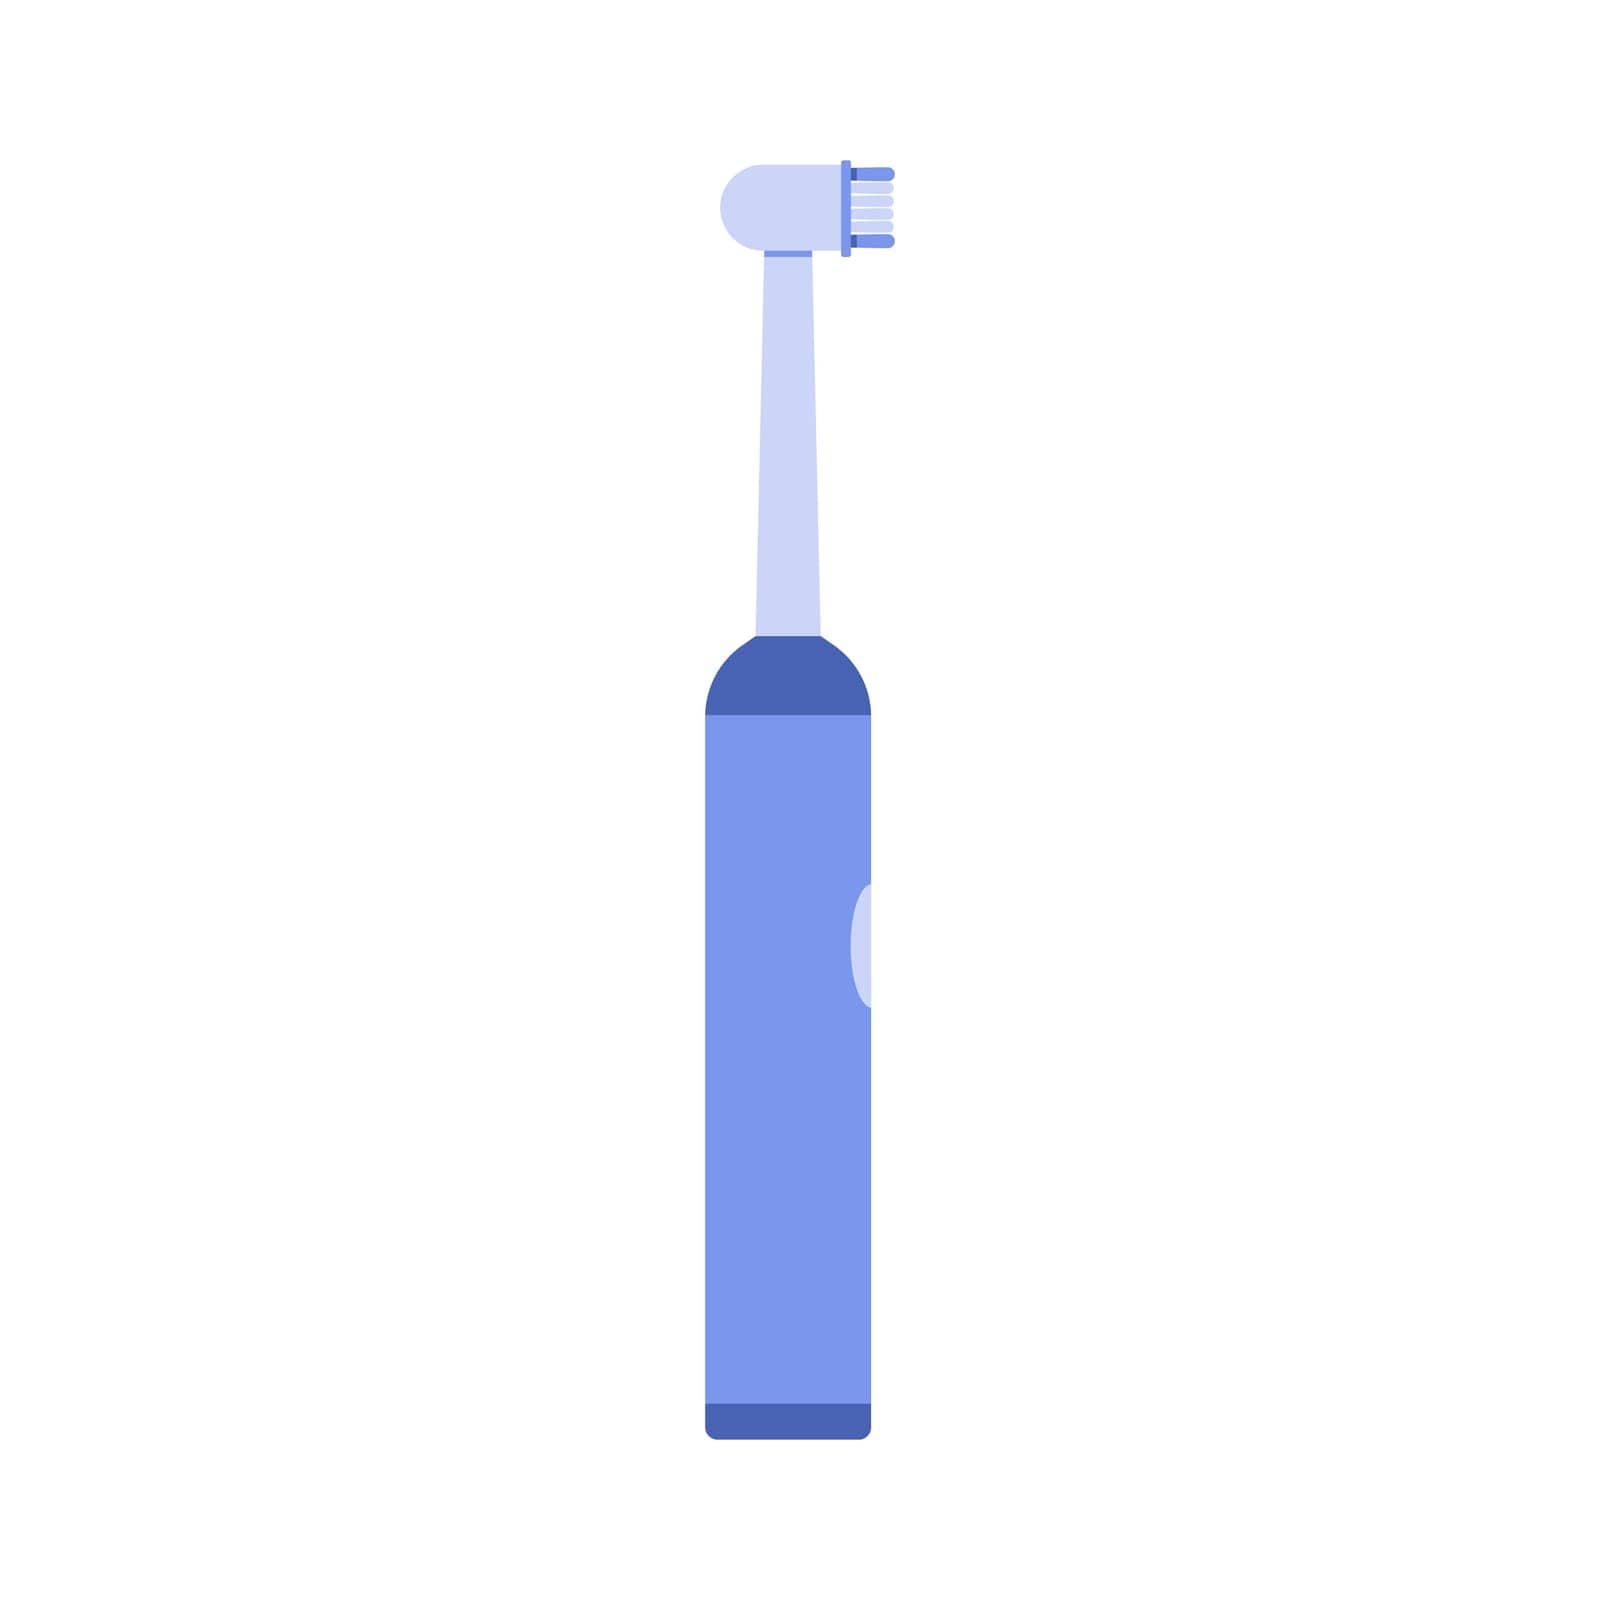 Electric toothbrush with bristle on head, dental equipment to brush teeth by iconicprototype